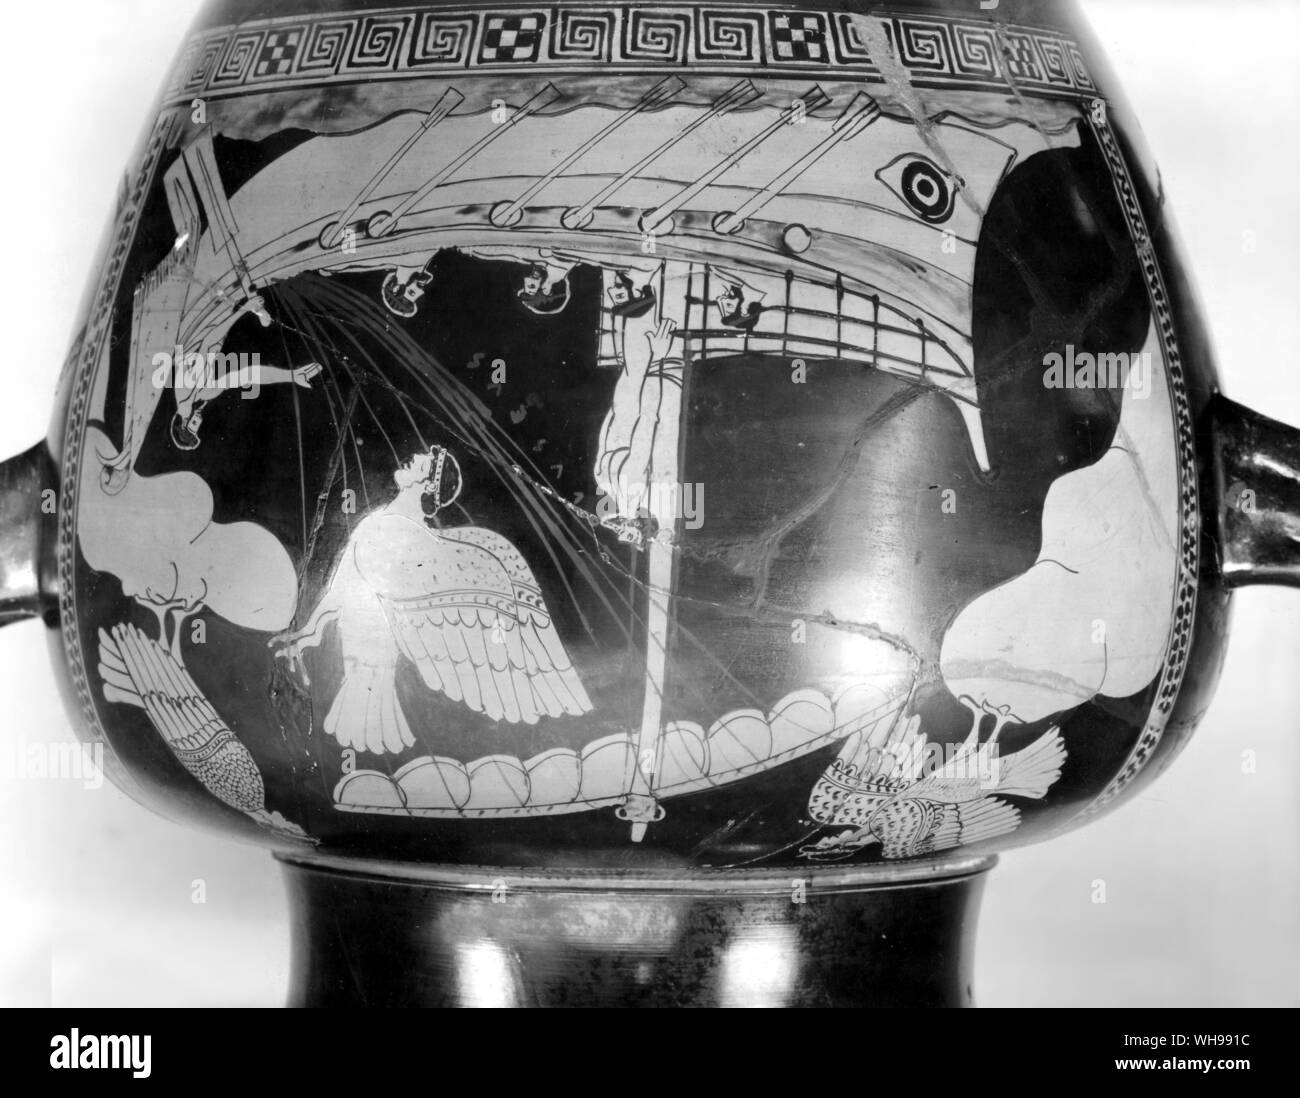 Ancient Warfare: The battle of Salamis depicted on a vase. The bows of the ships were specially strengthened to ram enemy ships.. Stock Photo